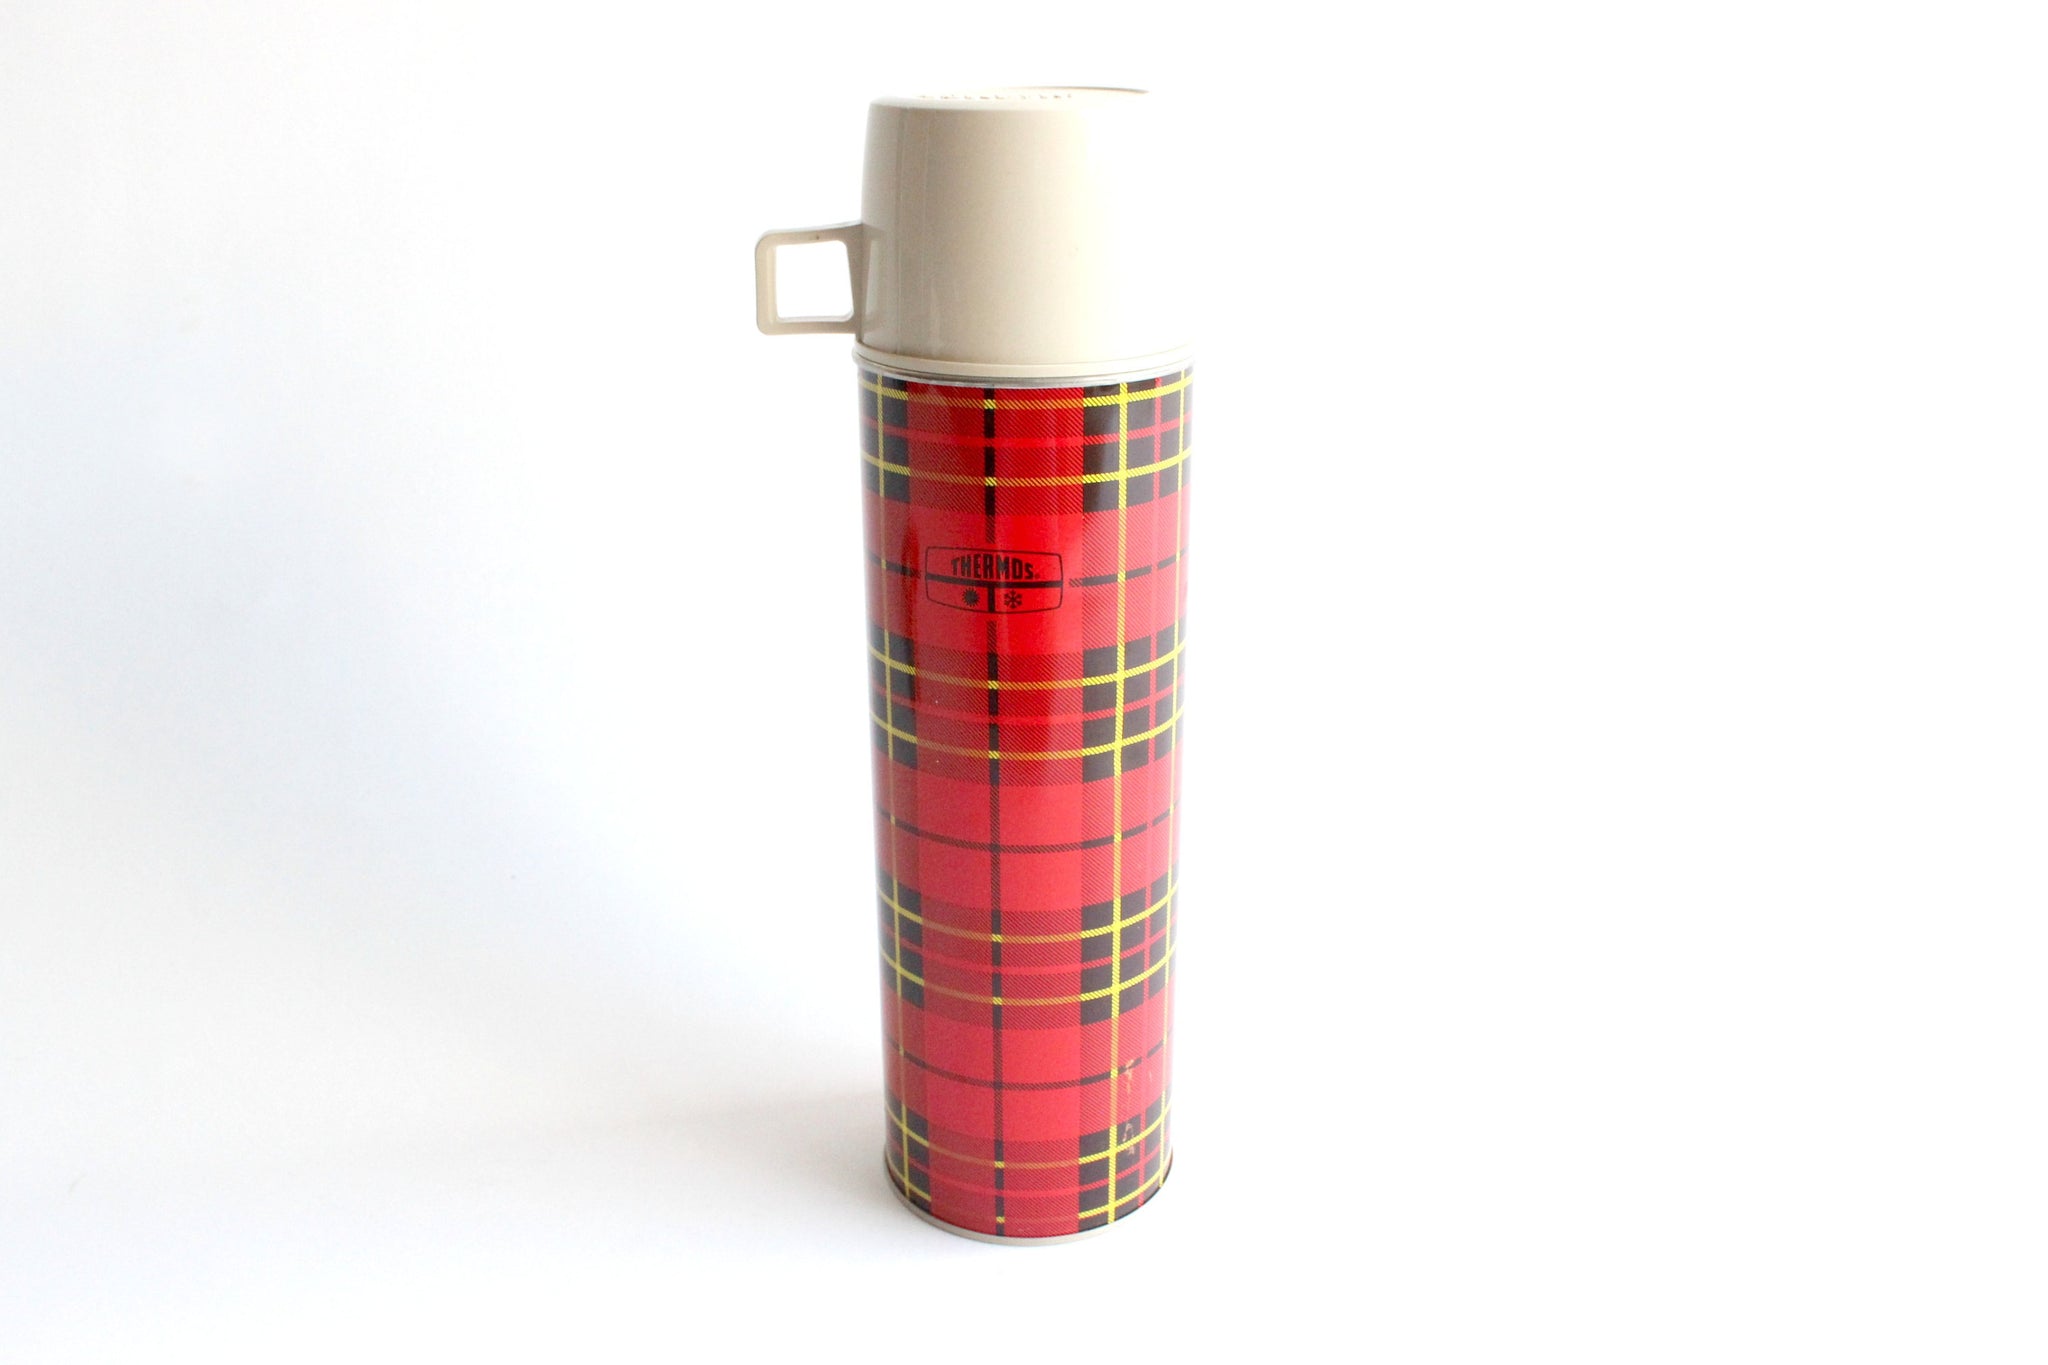 Vintage 1964 King Seeley Red Plaid Thermos #2242. 1 Pint Size